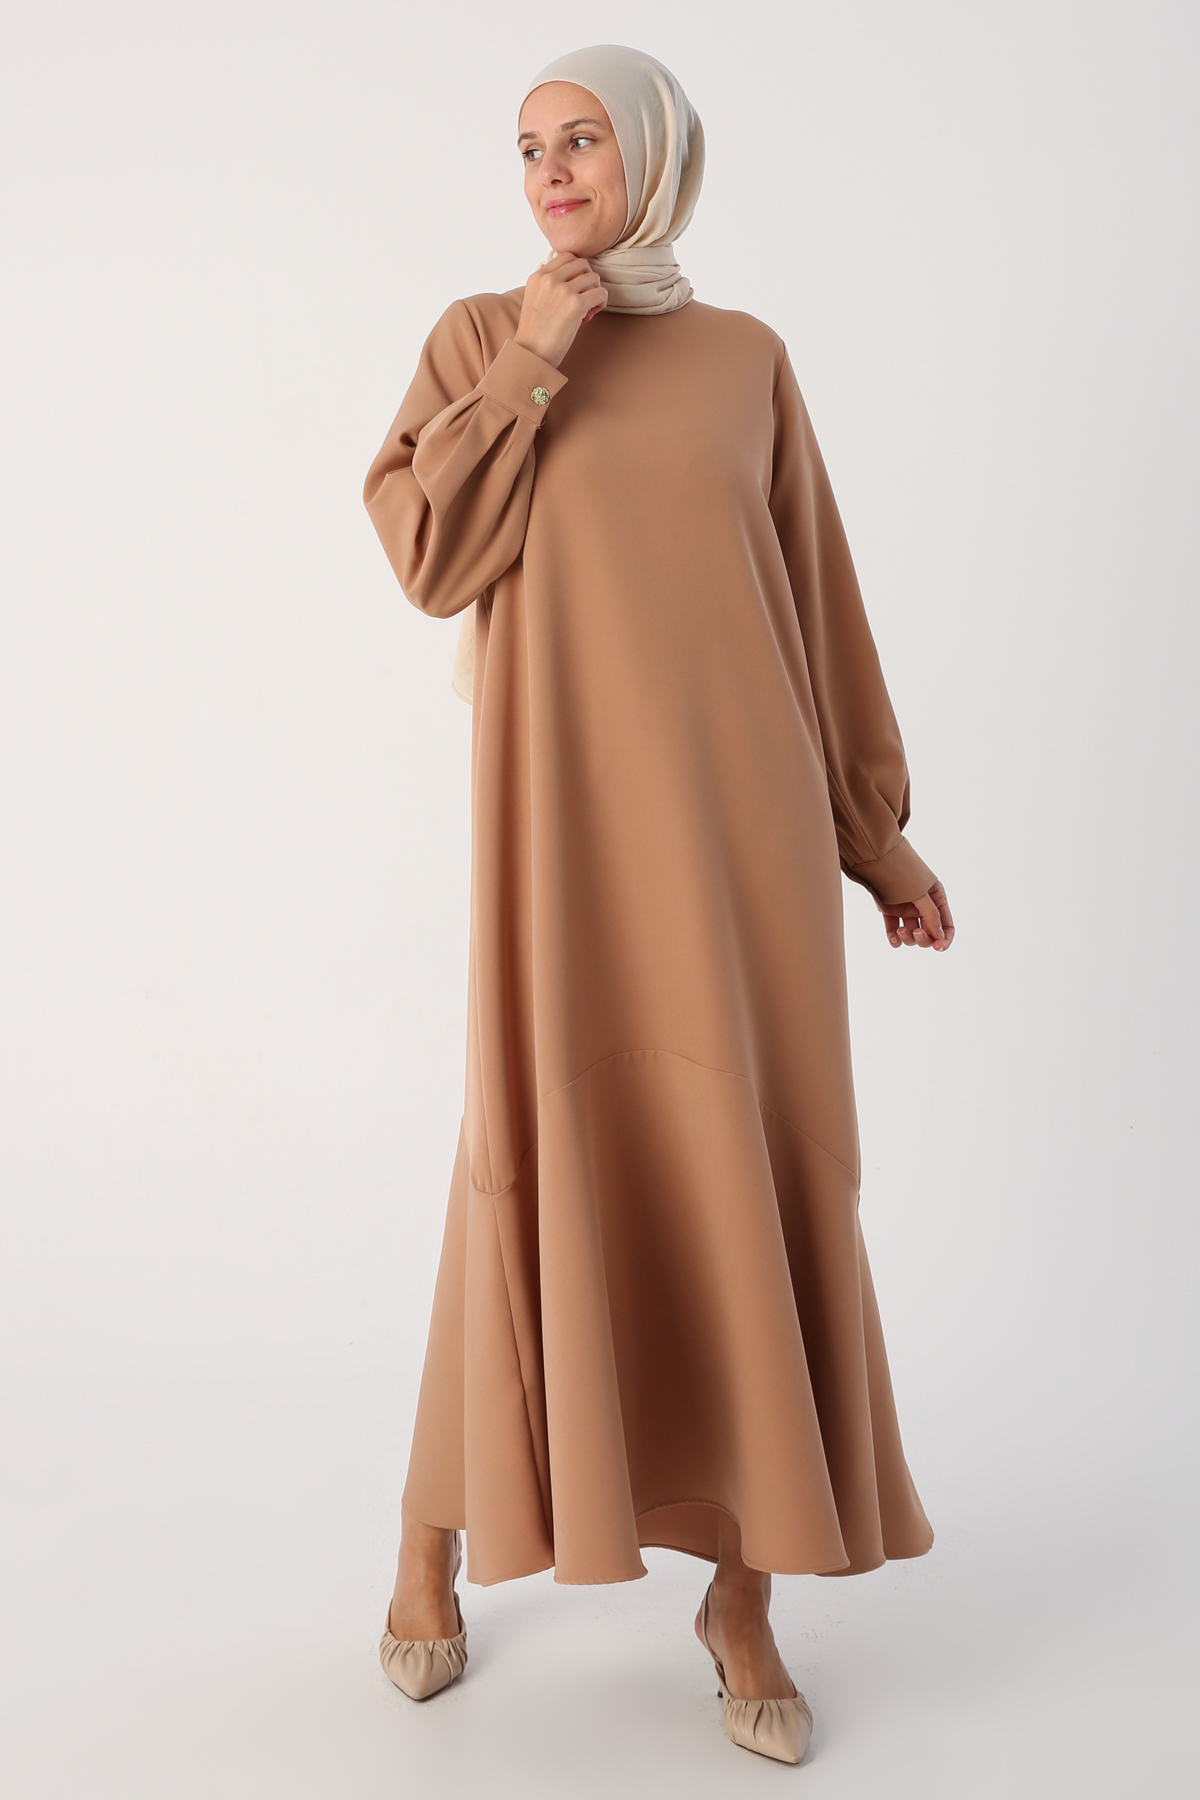 A model wears ALL10626 - Toprak01 Skirt With Flounce Dress - Earth Color, wholesale Dress of Allday to display at Lonca